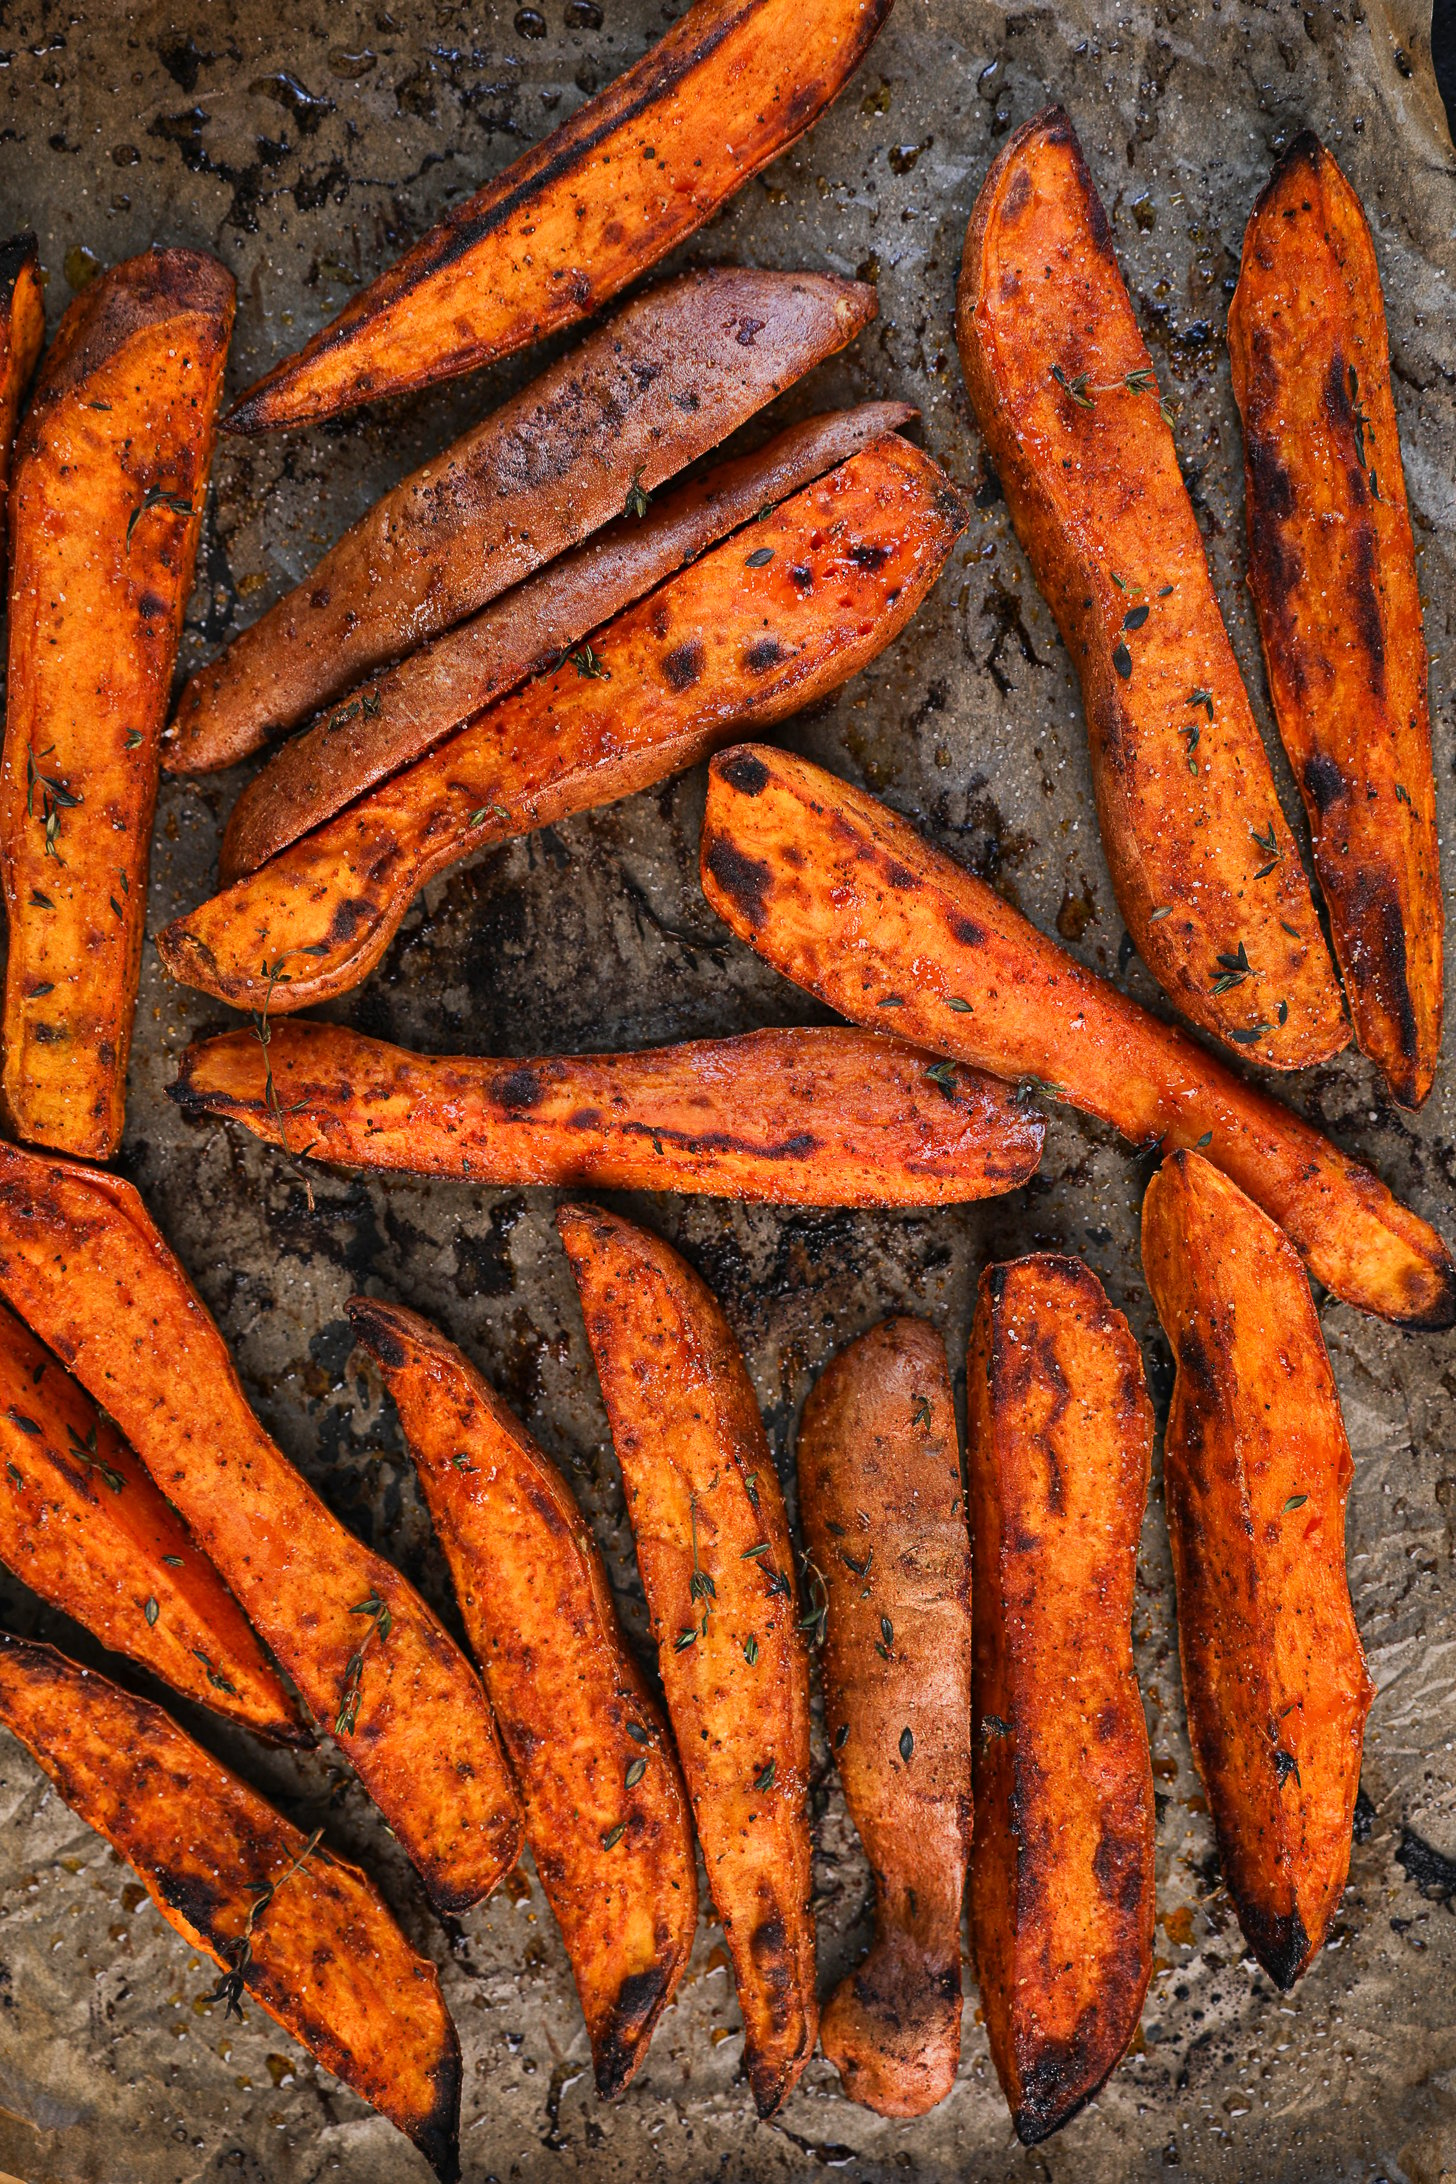 Baked sweet potato wedges, charred and resting on a lined baking sheet.